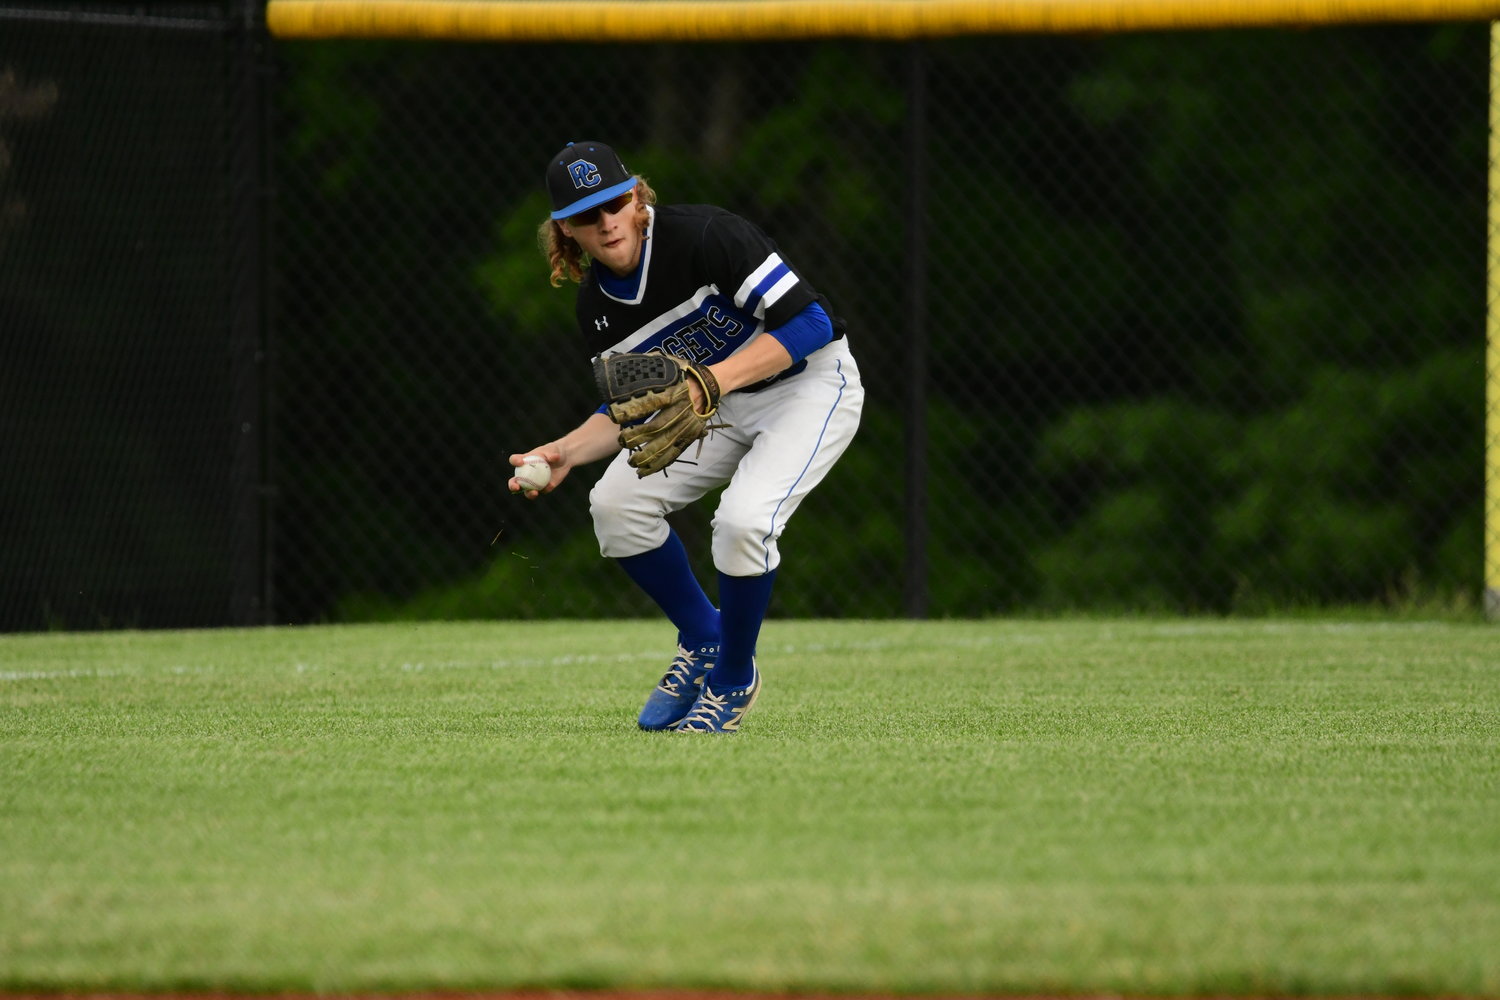 Photos from a Class 2 quarterfinal game between Putnam County and Russellville, held on May 25, 2022, in Mokane.